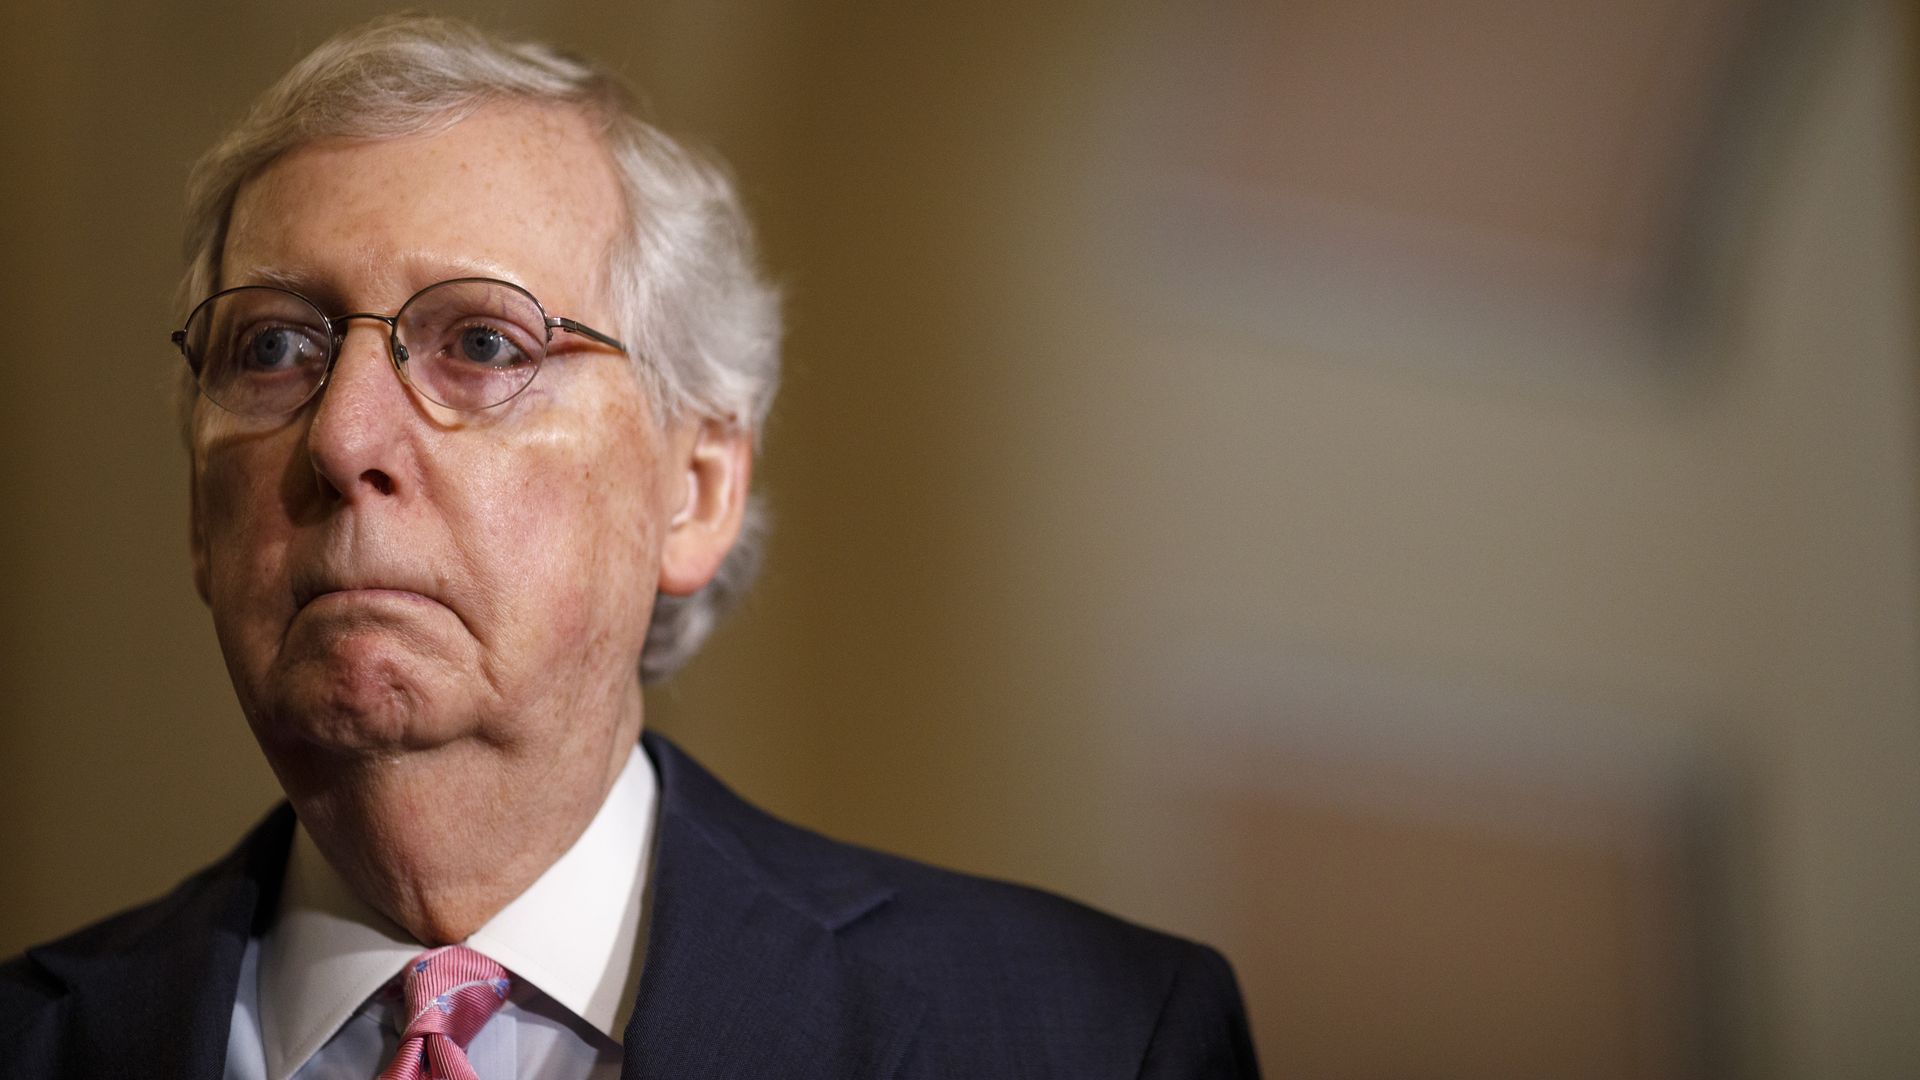 mitch mcconnell: impeachment will fail with me as senate majority leader - axios